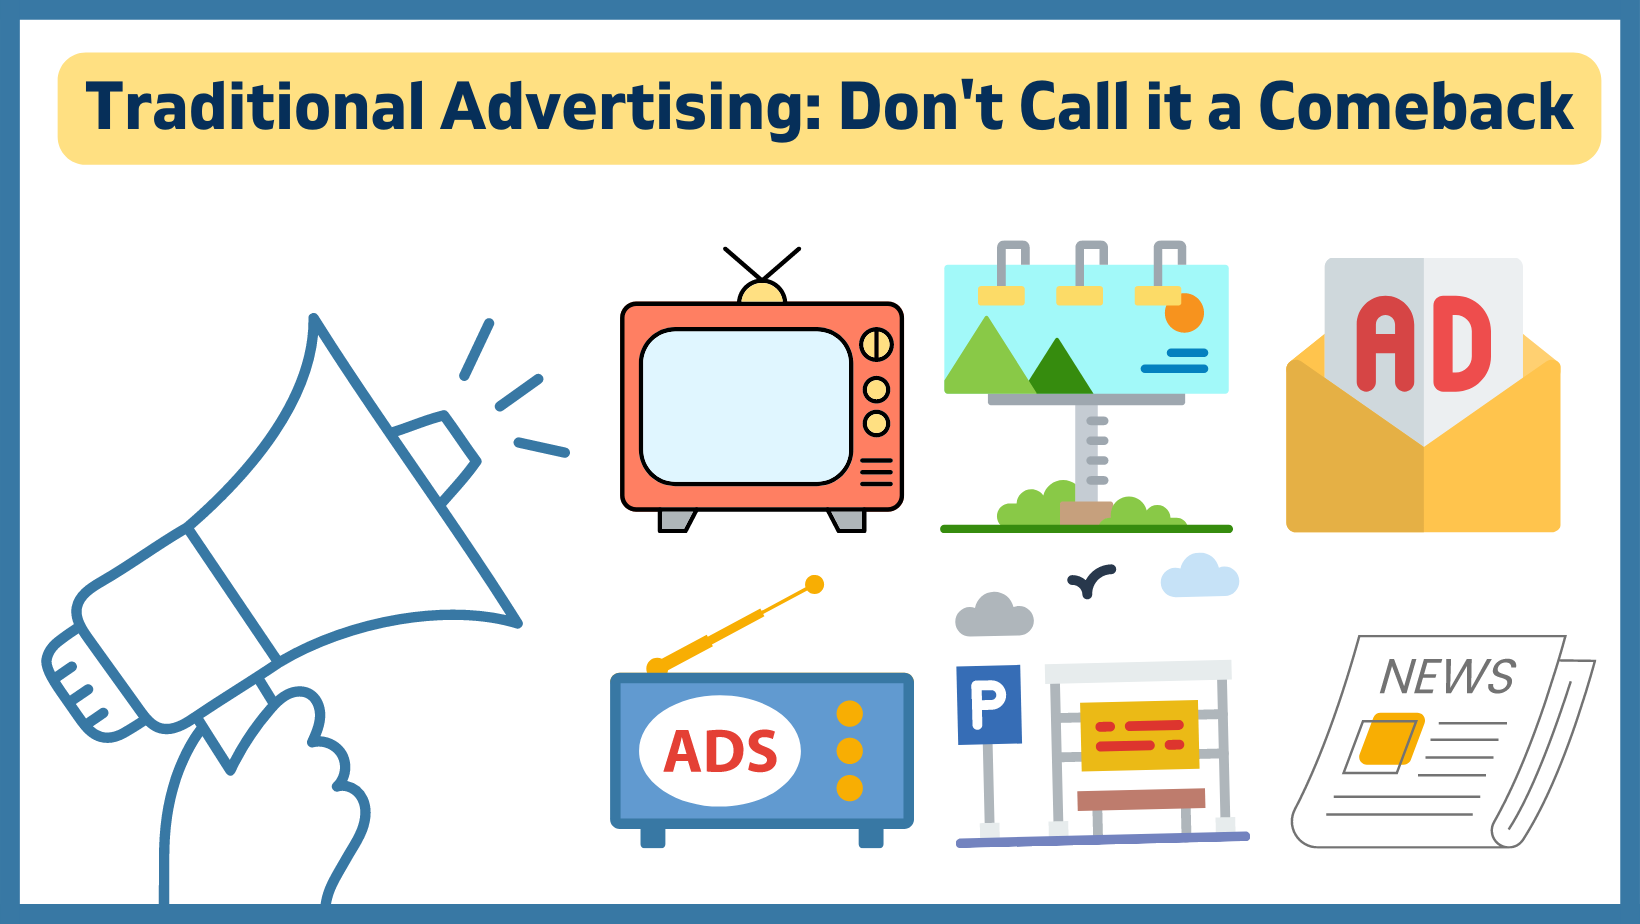 Traditional Advertising icons